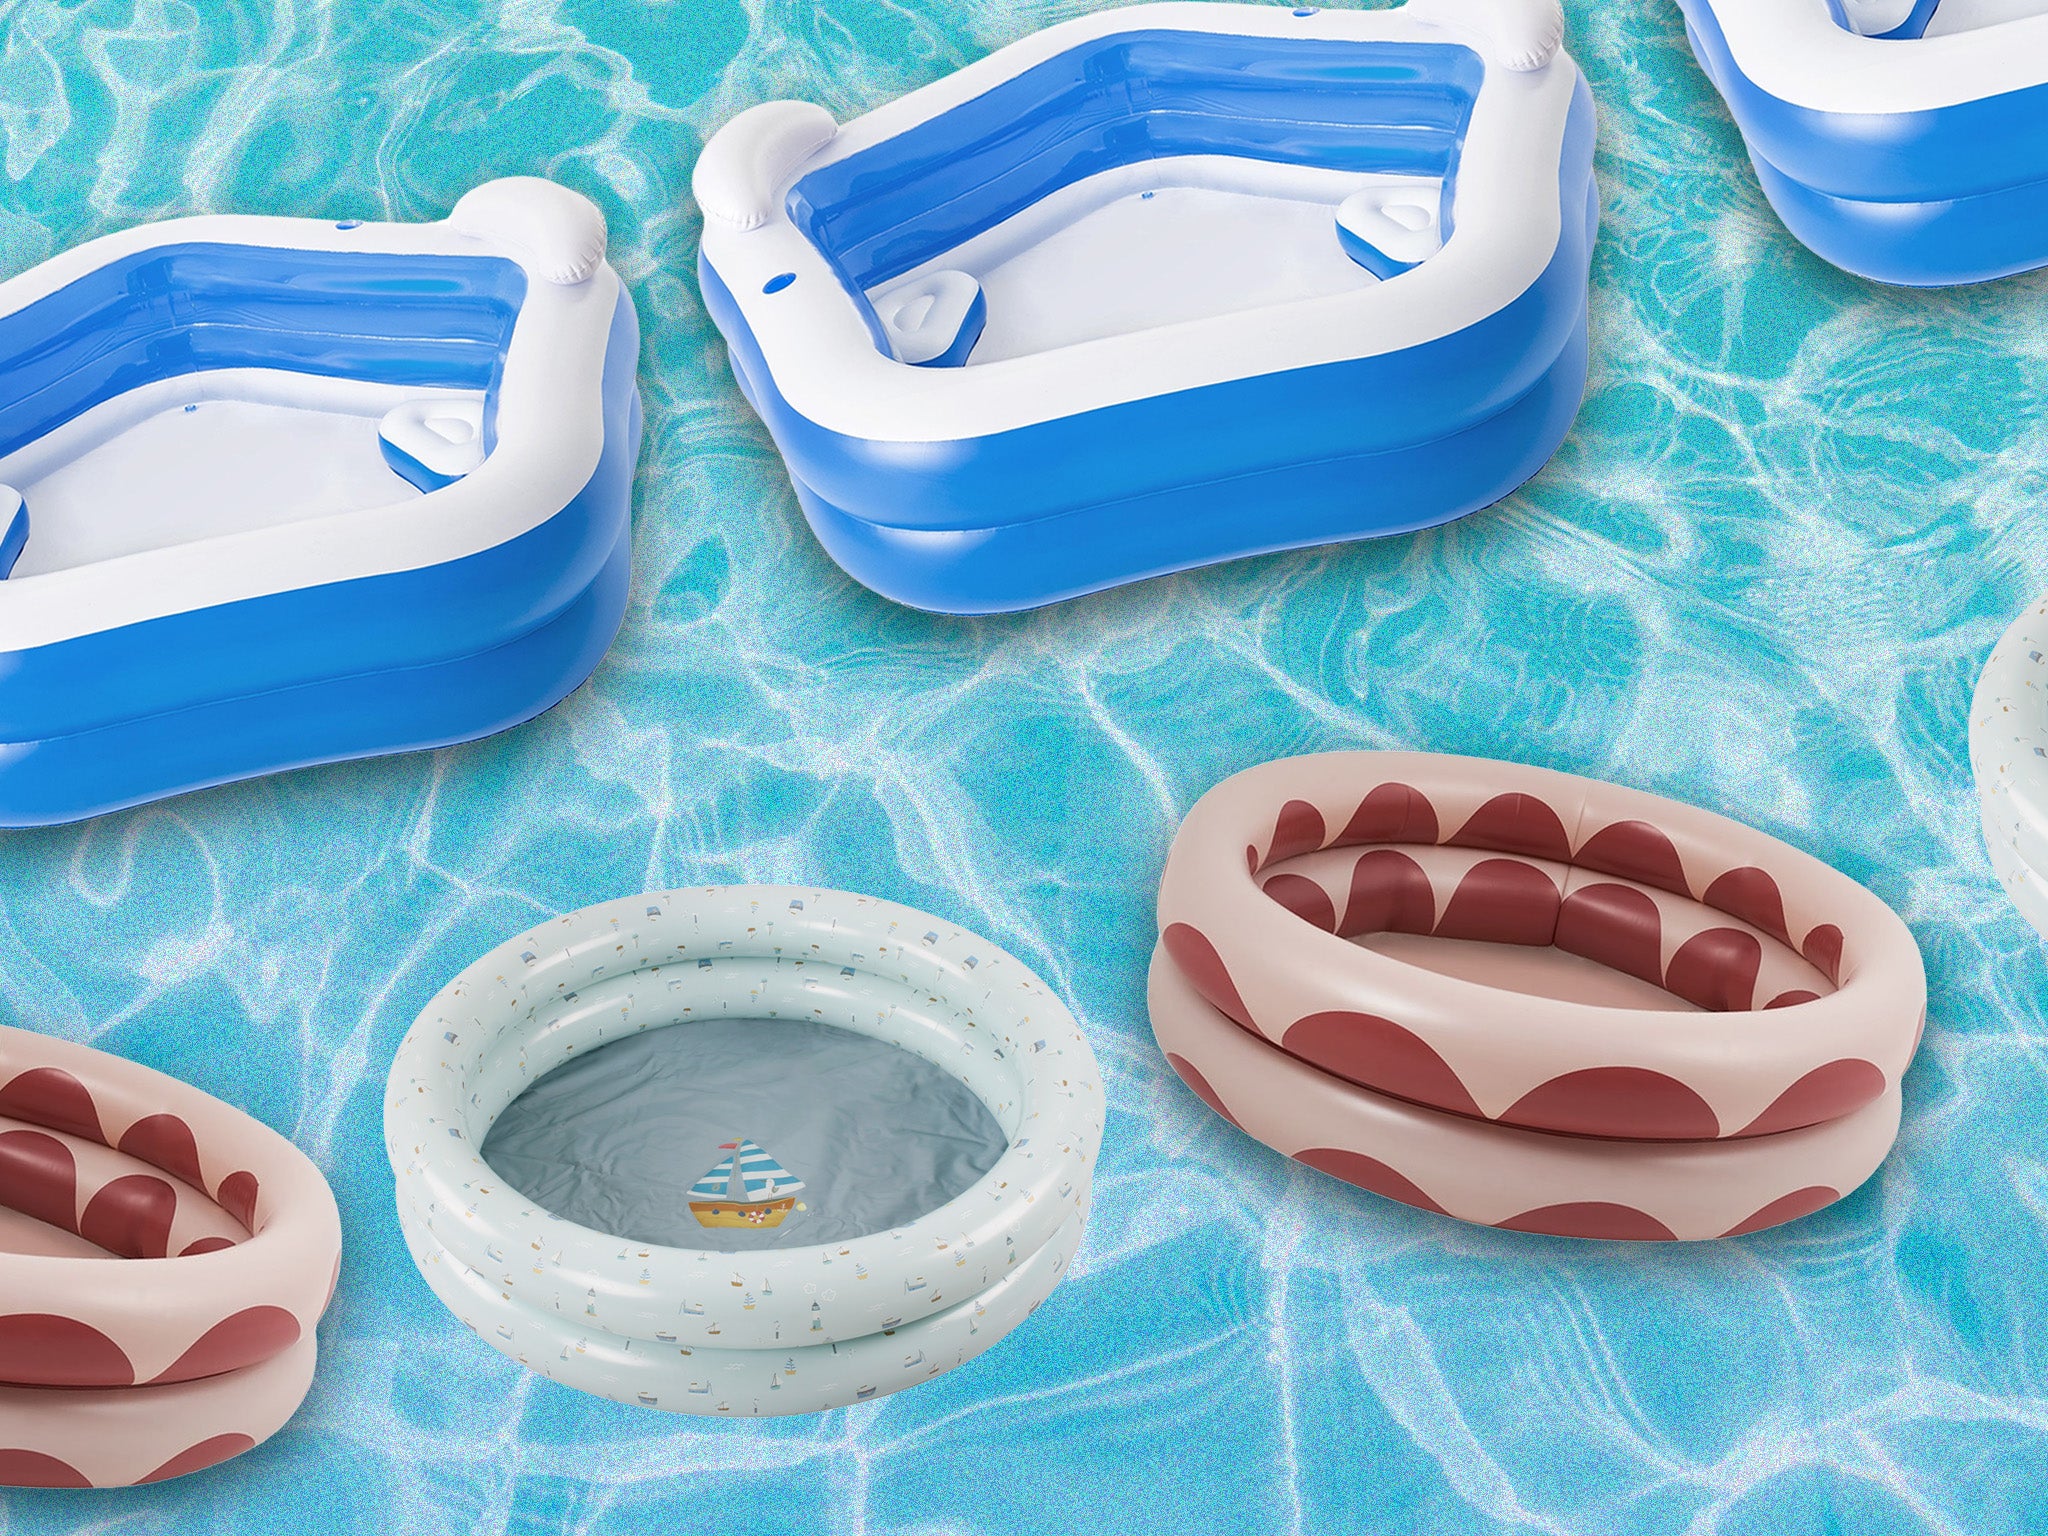 Cup holders and headrests in larger pools ensure it’s not just the kids having a splashing time